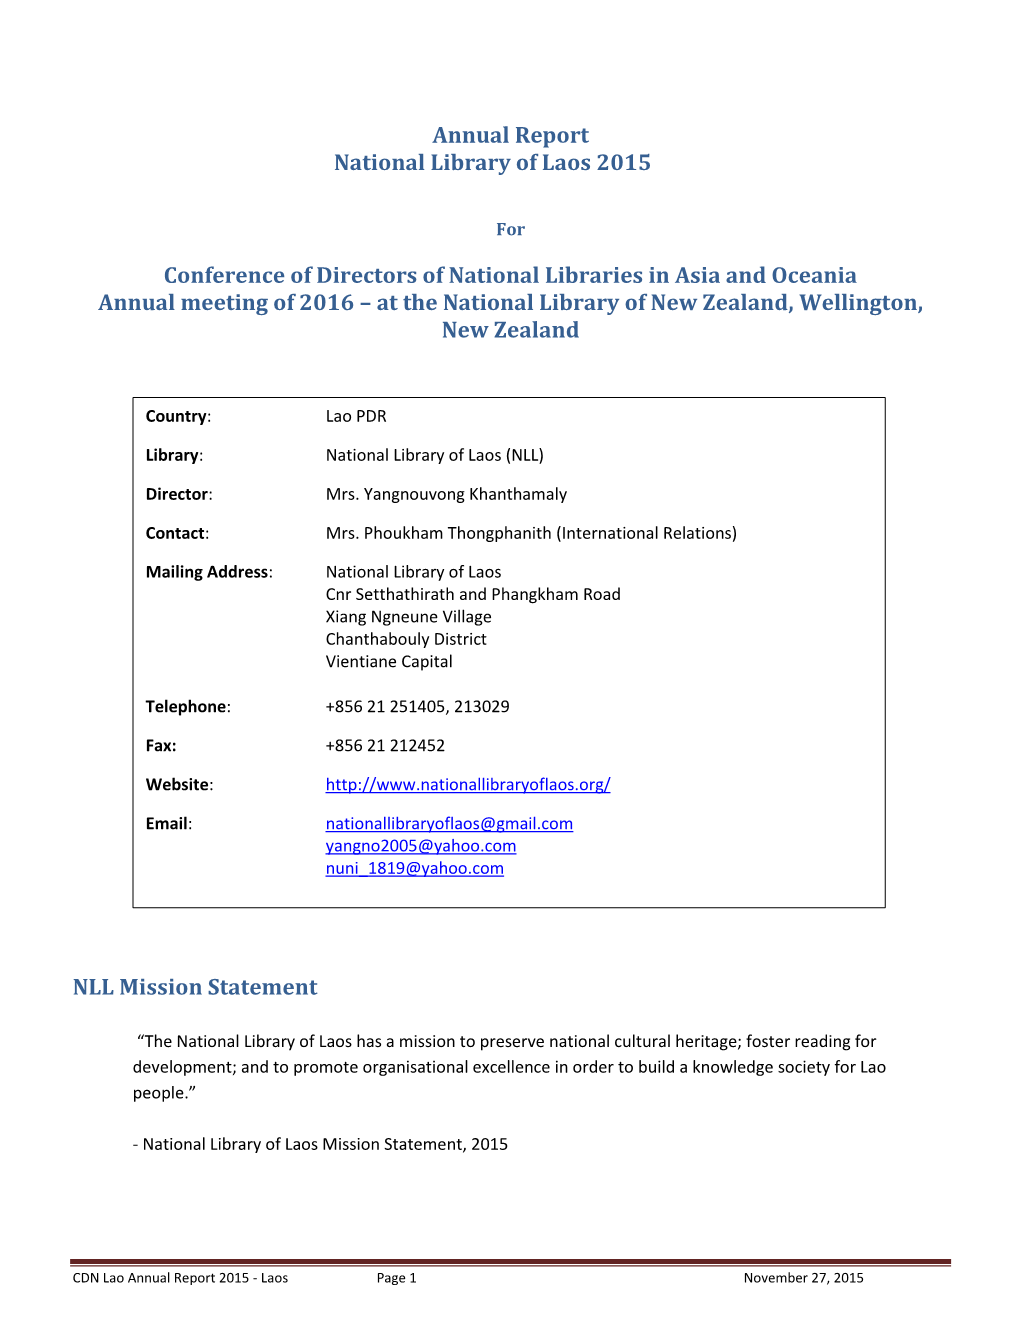 Annual Report National Library of Laos 2015 Conference of Directors